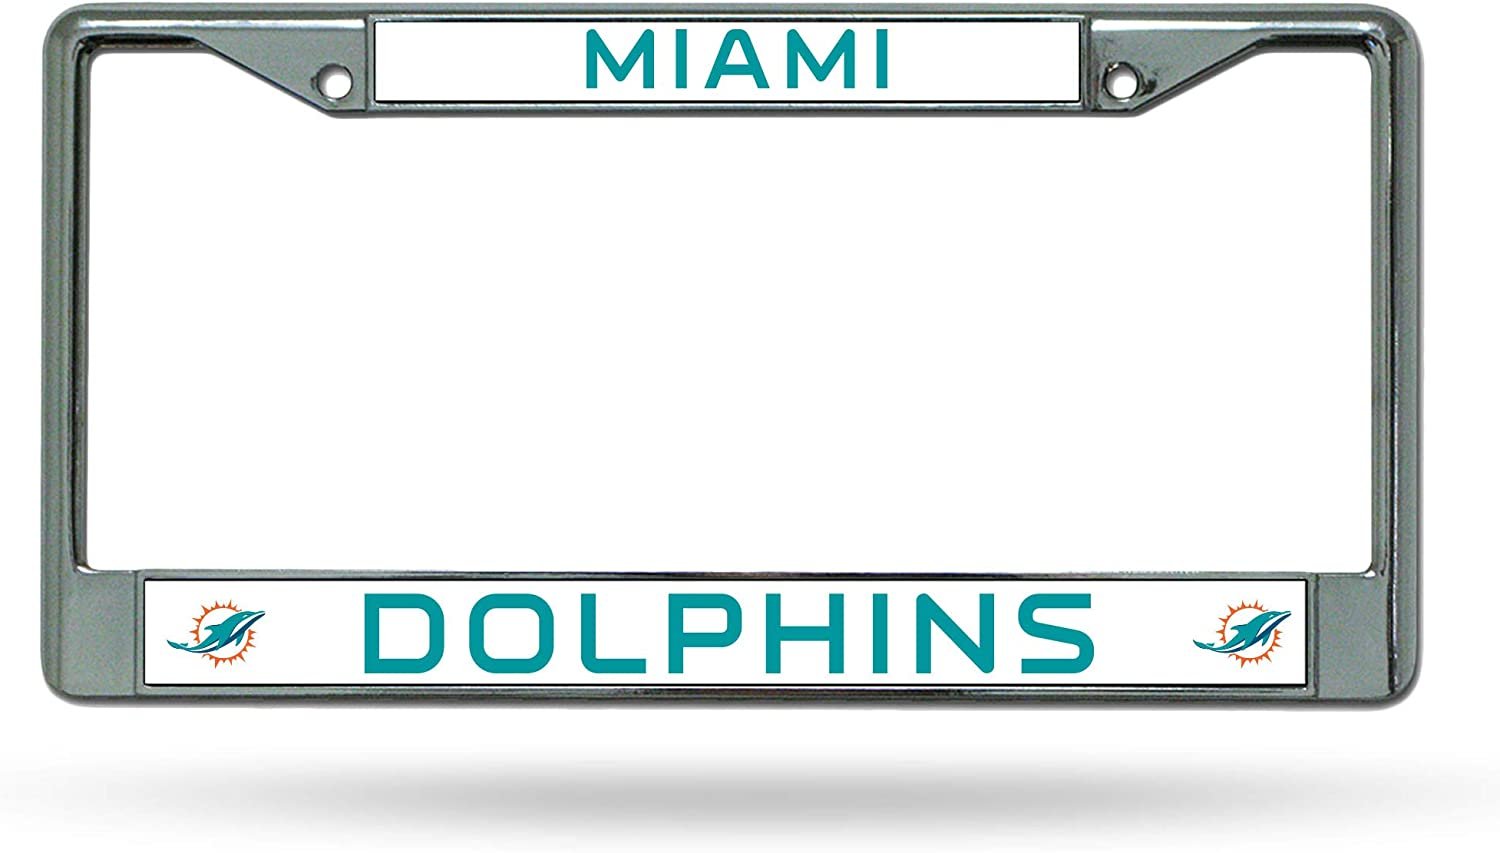 Miami Dolphins Metal License Plate Frame Chrome Tag Cover 6x12 Inch